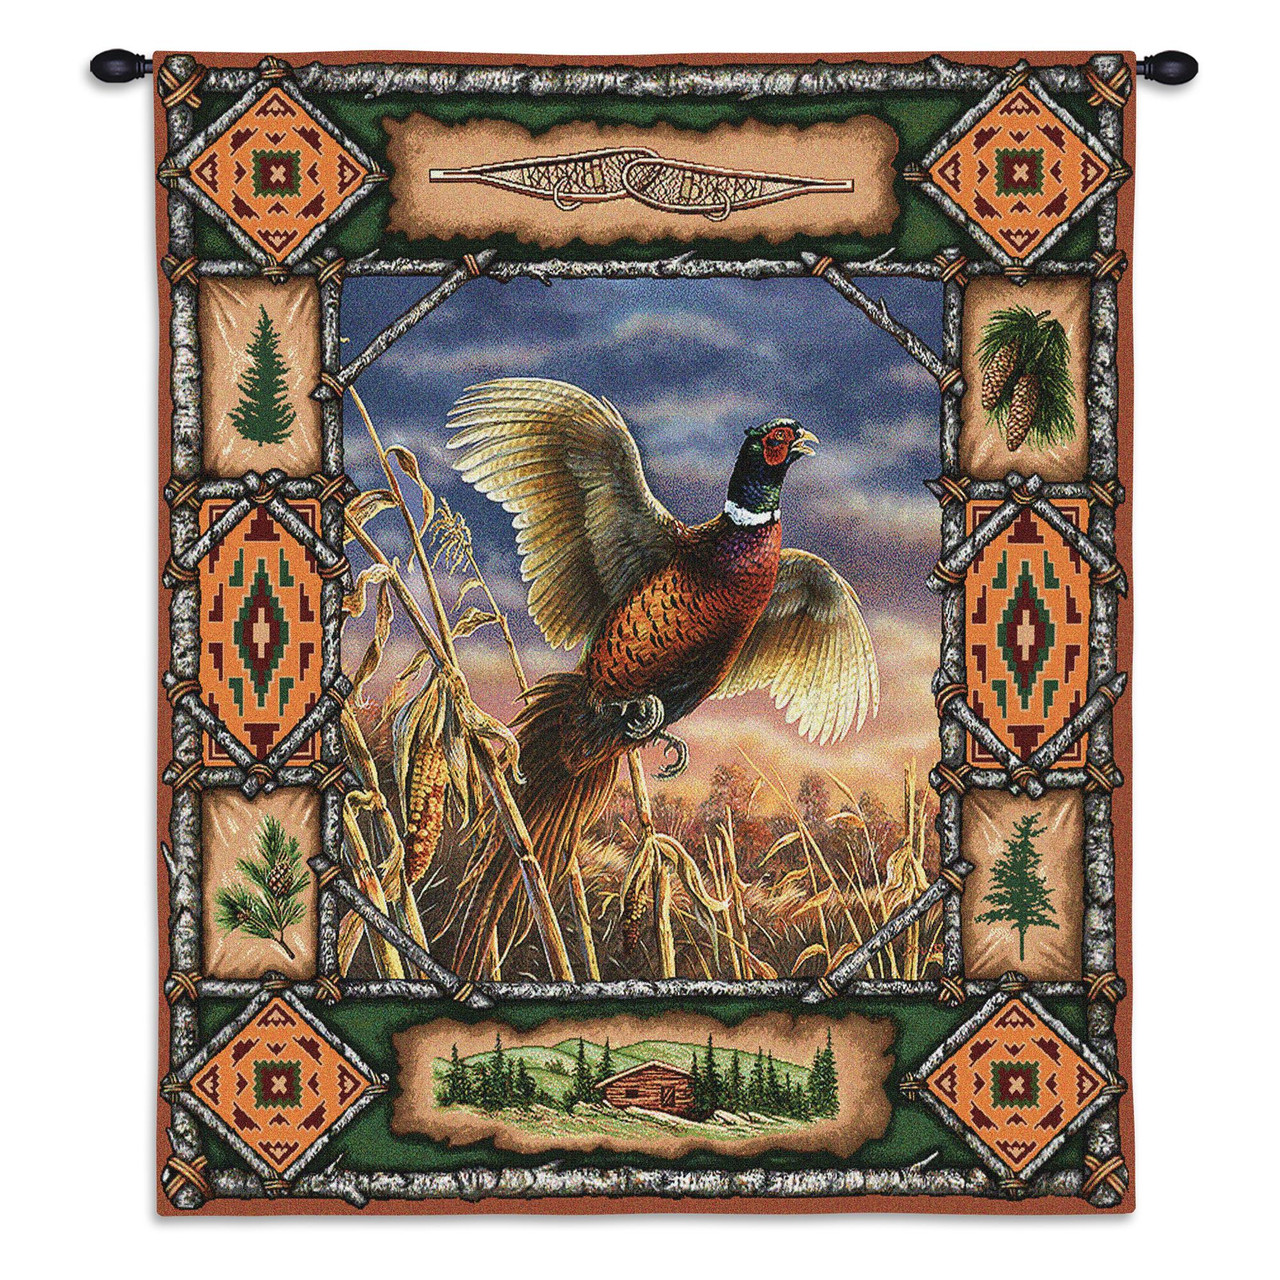 Pheasant Lodge Woven Tapestry Wall Art Hanging Rustic Hunting Cabin Decor 100 Cotton Usa Size 33x26